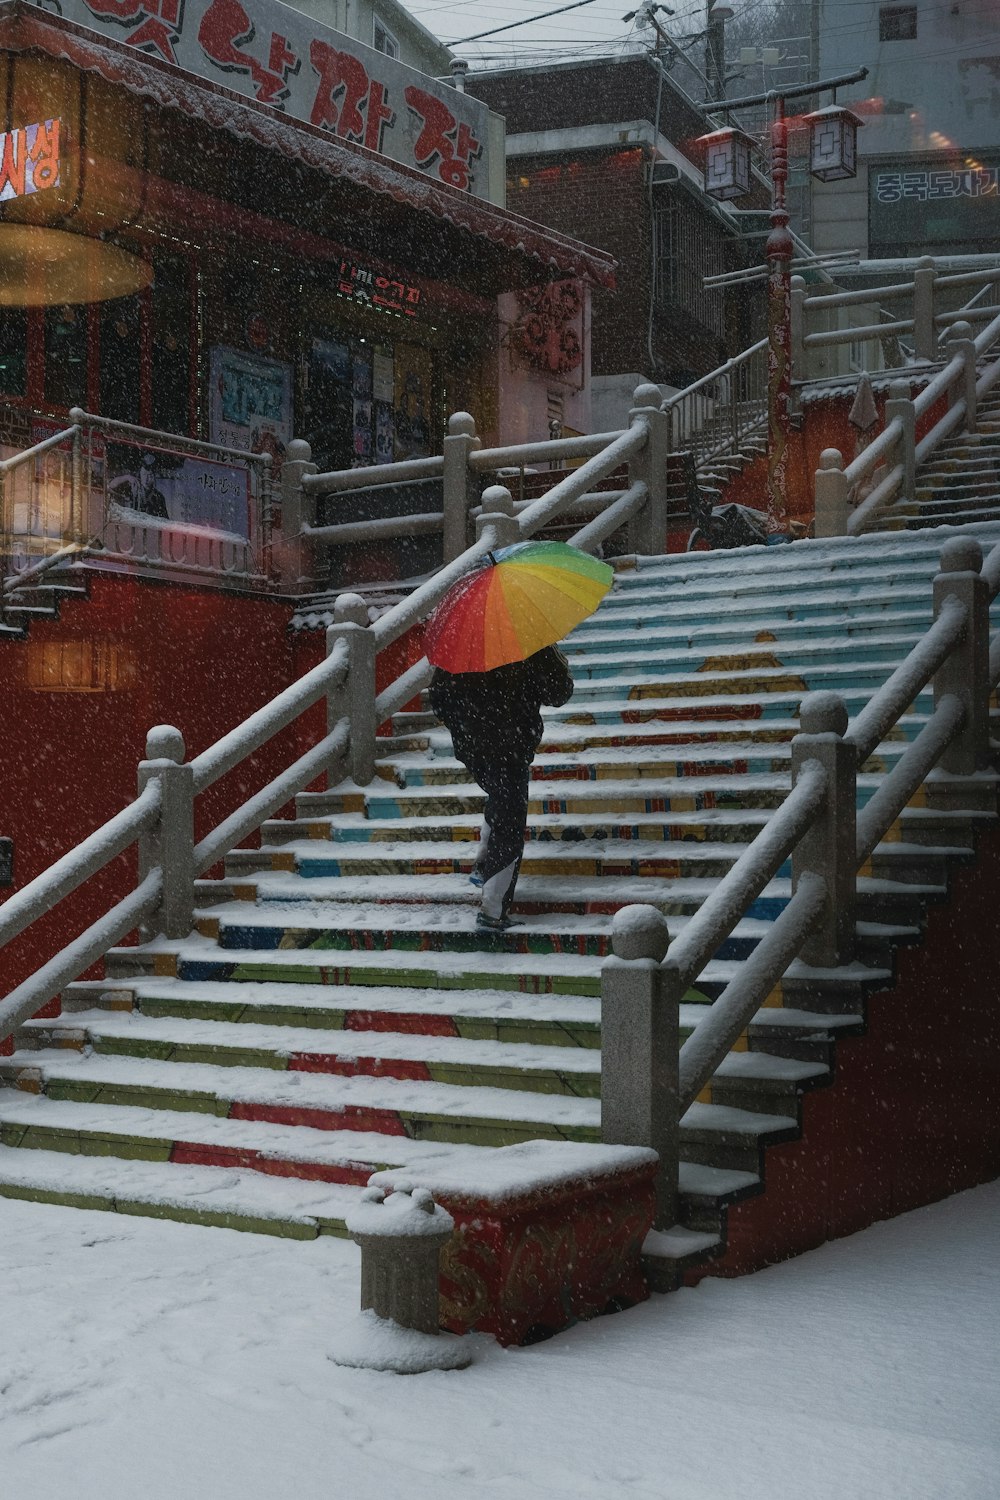 a person with an umbrella walking up some stairs